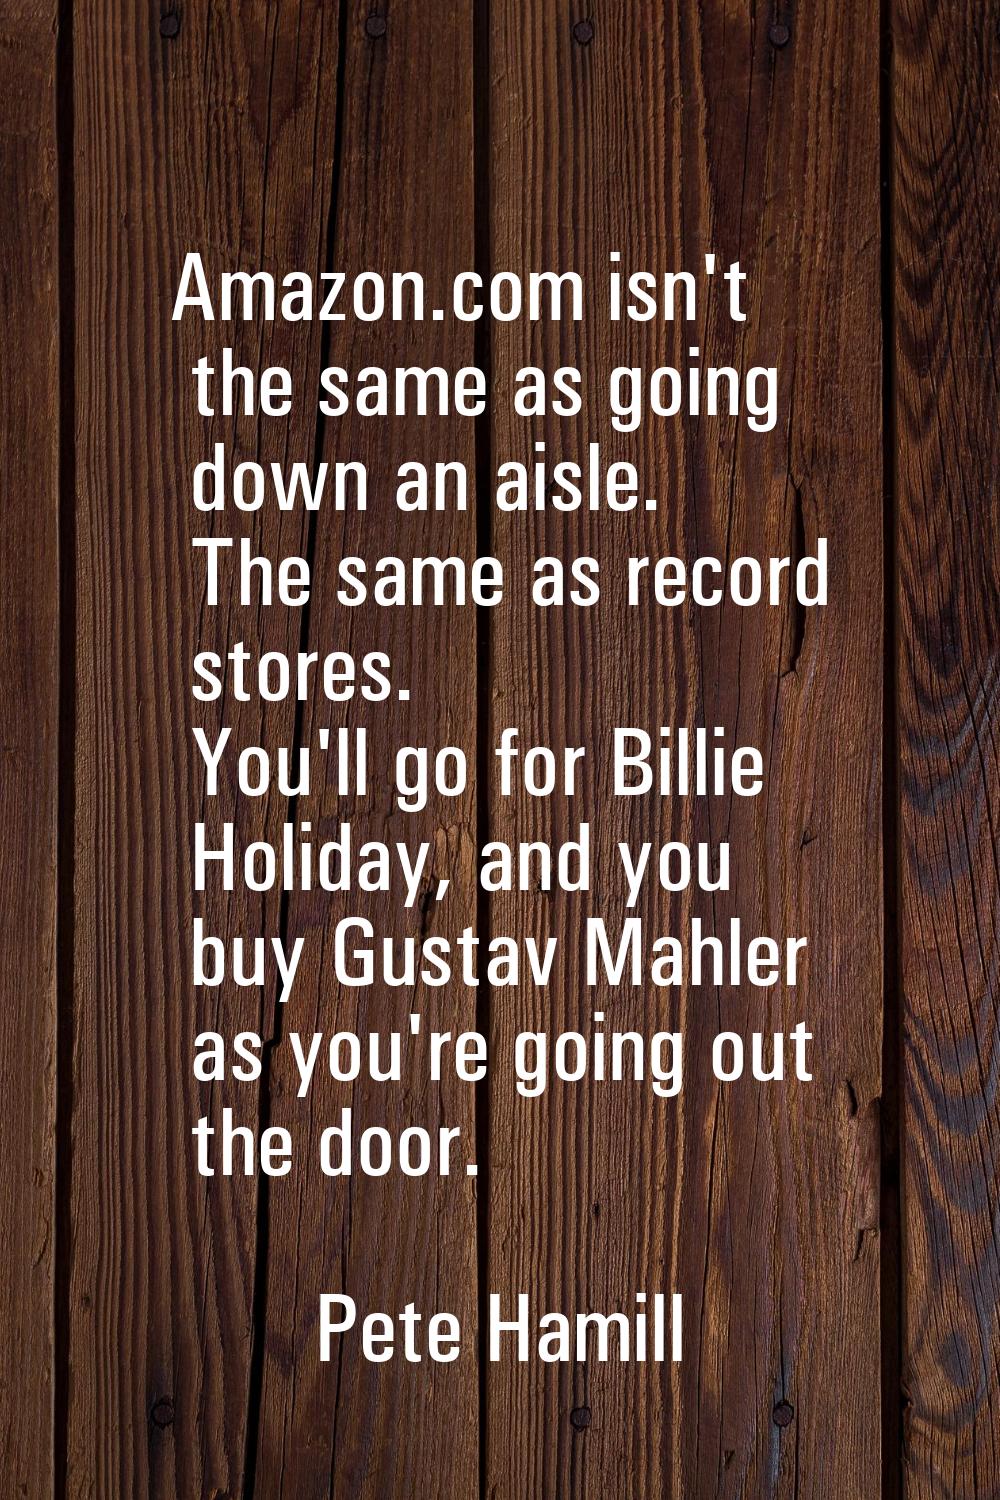 Amazon.com isn't the same as going down an aisle. The same as record stores. You'll go for Billie H